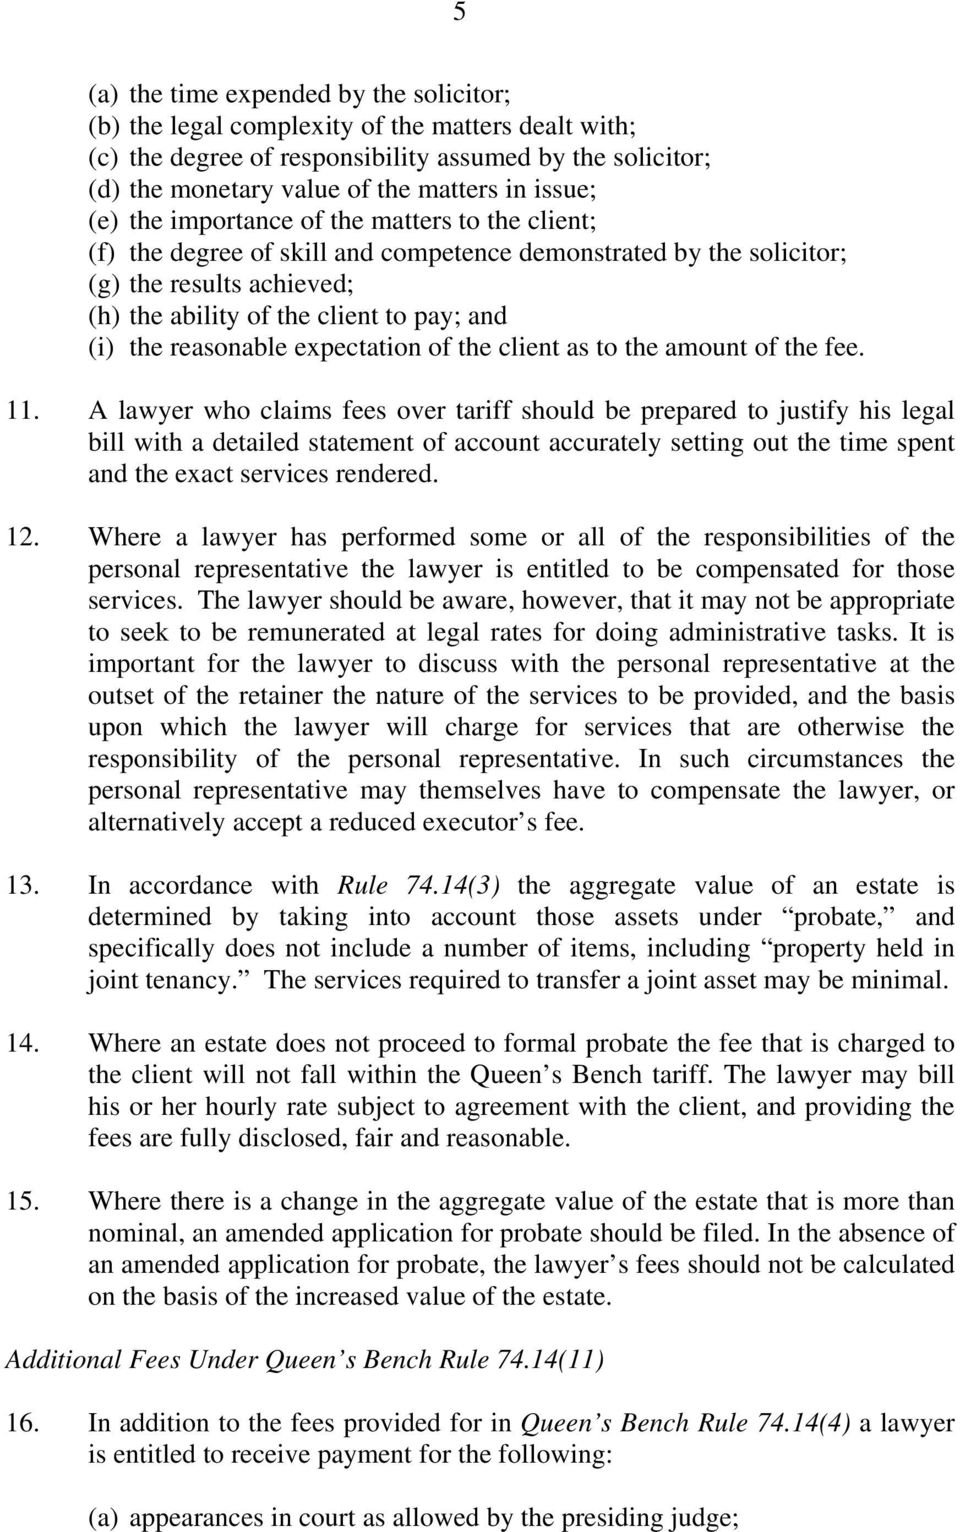 the reasonable expectation of the client as to the amount of the fee. 11.